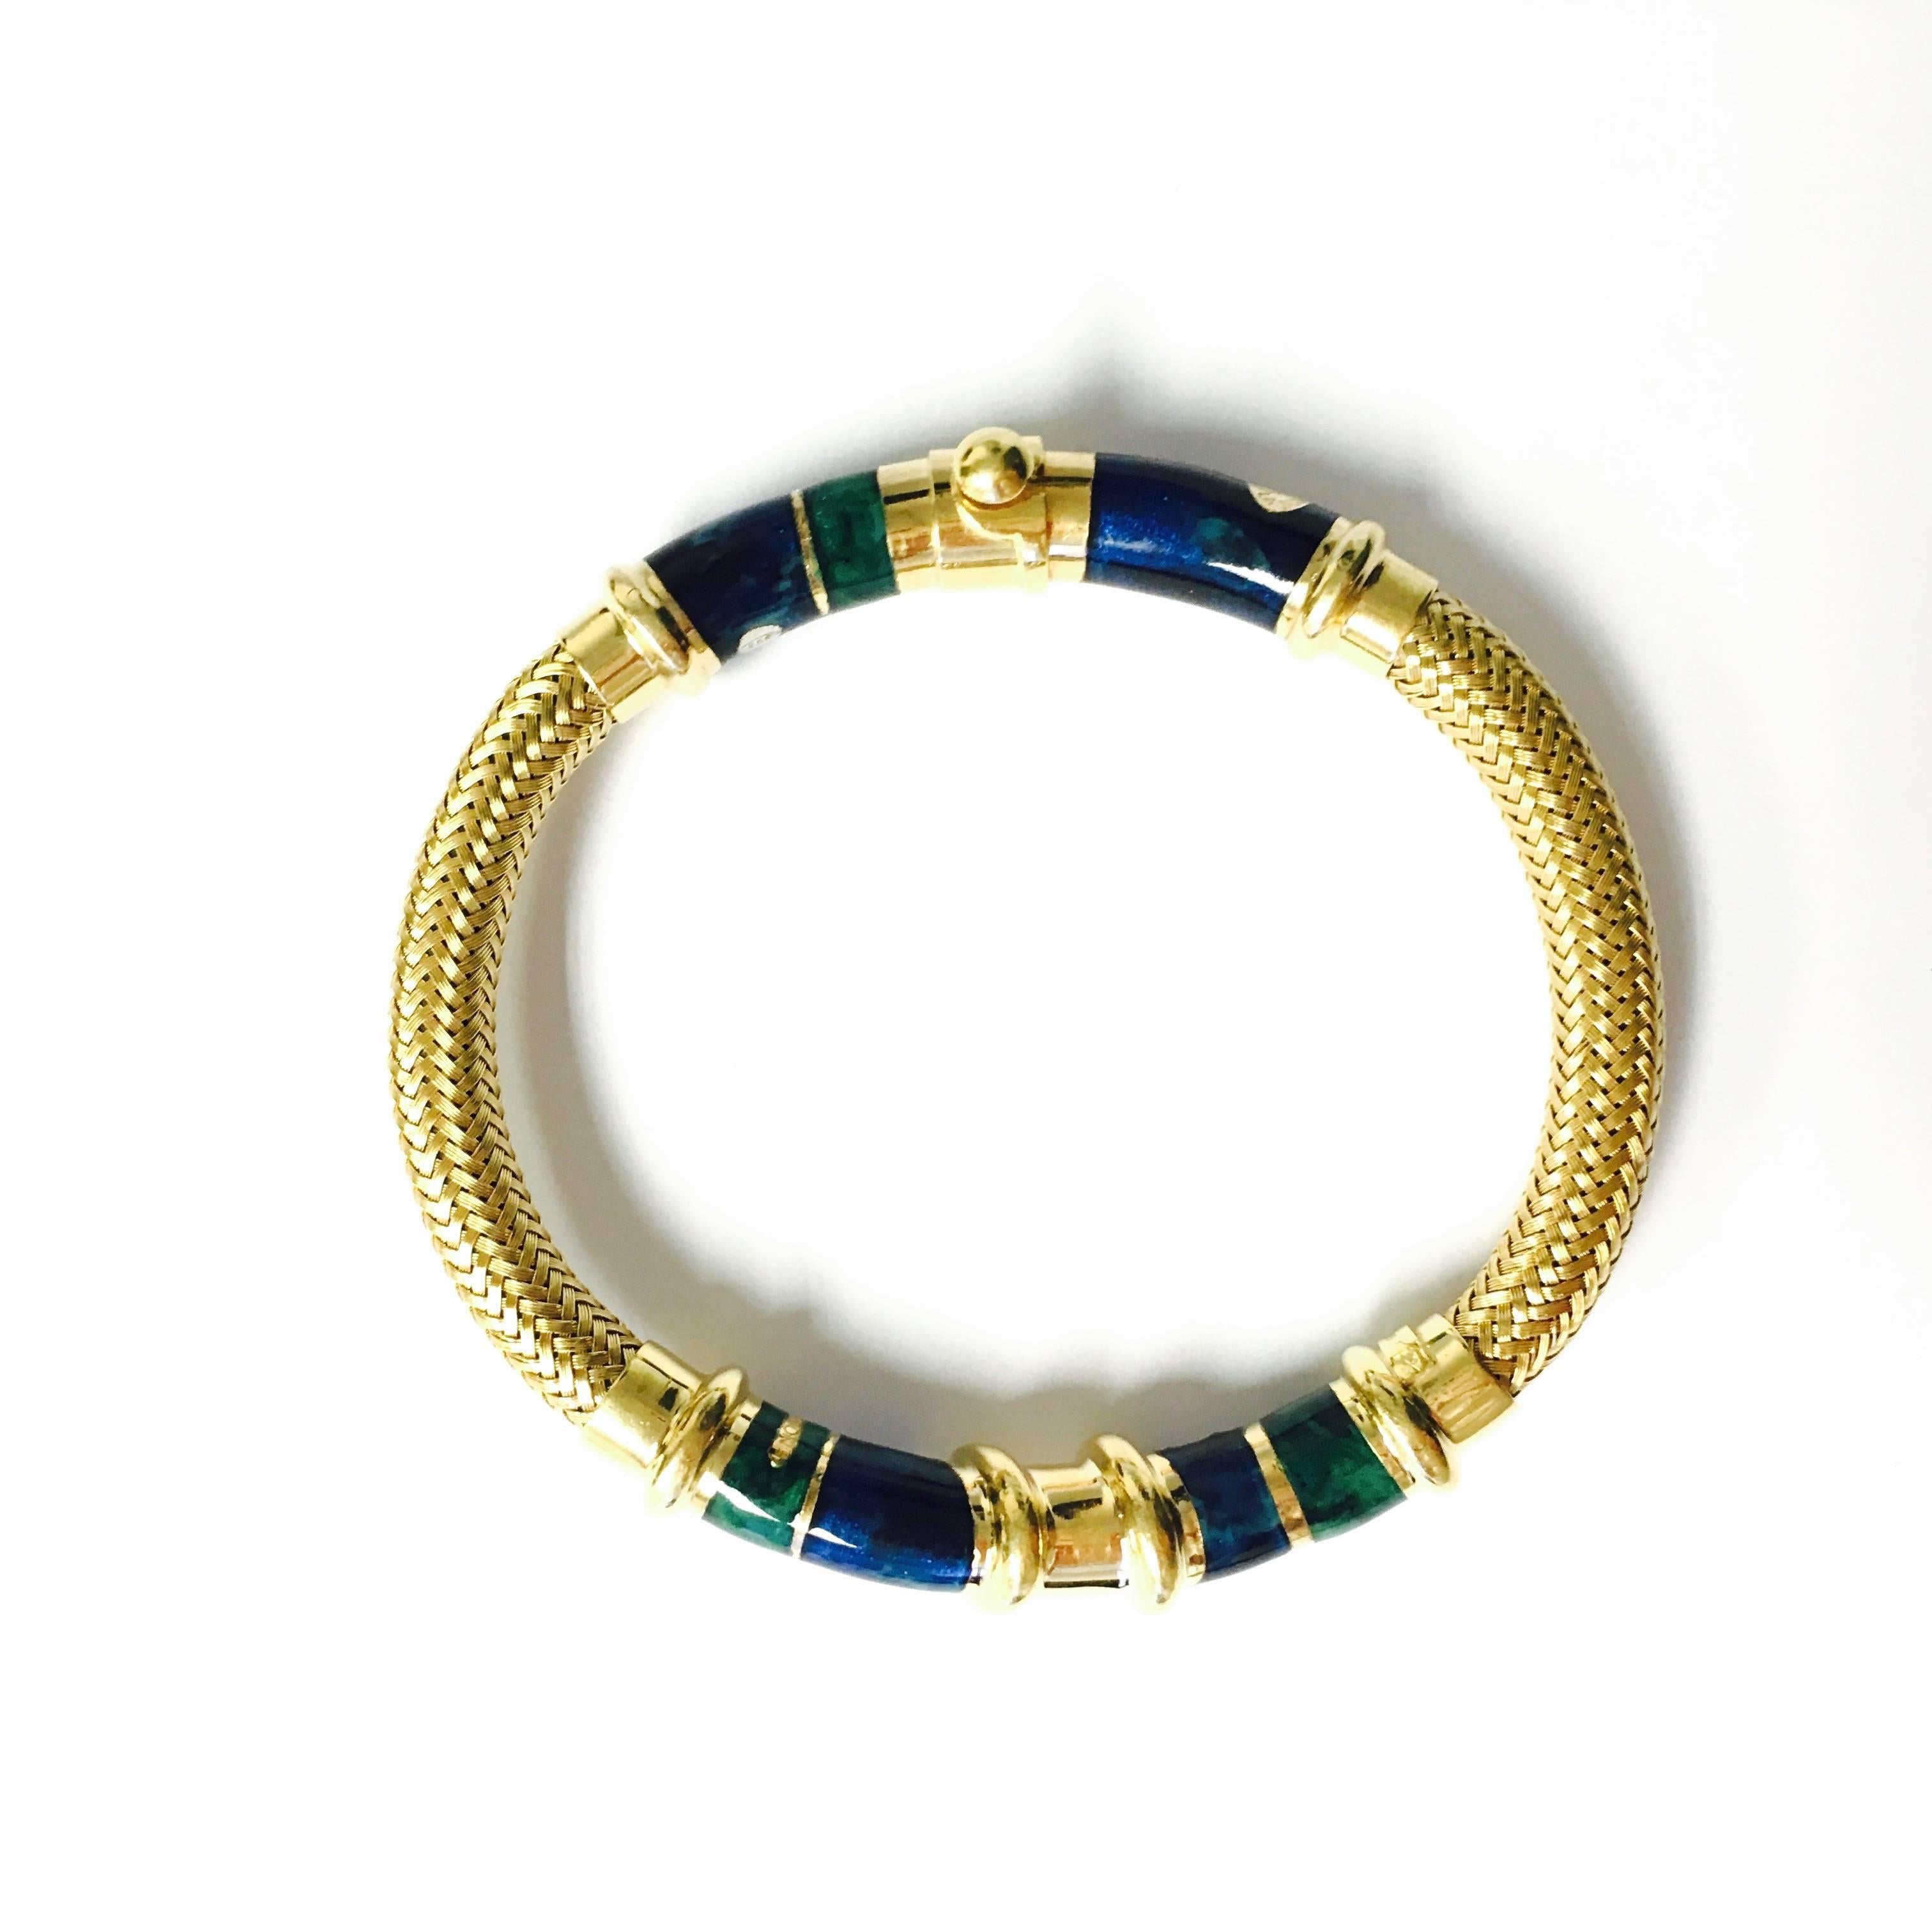 Embellish yourself with exotic flair in this designer La Nouvelle Bague enamel bangle bracelet. Crafted of mesh design yellow gold cable accented with  marbled, green and cobalt color enamel, abstract design elements. 
DESIGNER / HALLMARKS: La